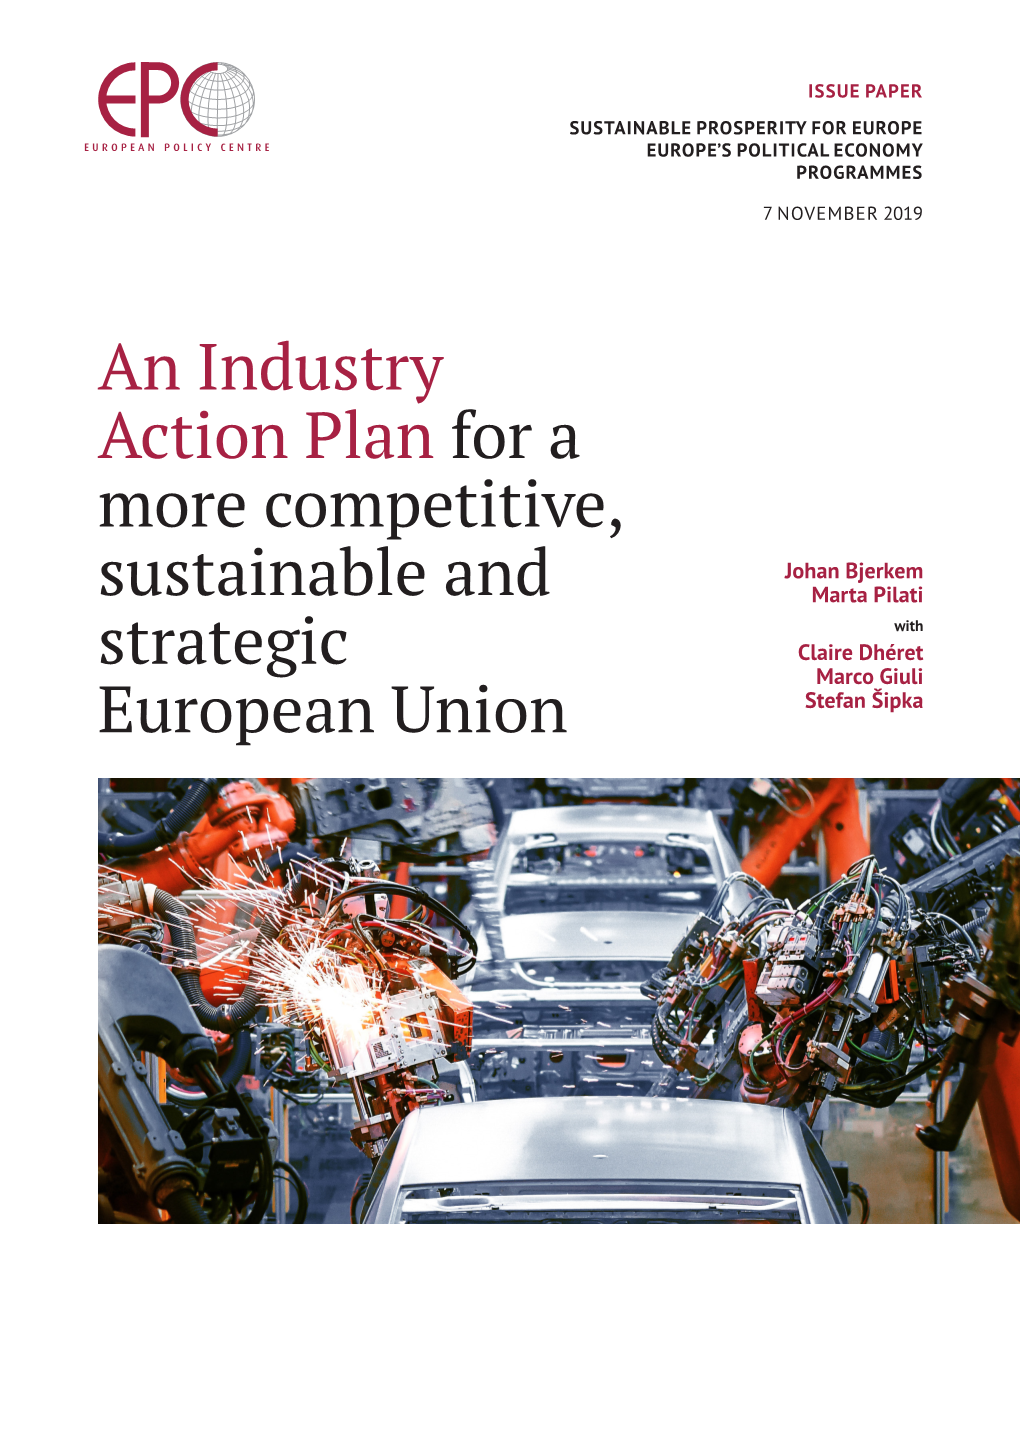 An Industry Action Plan for a More Competitive, Sustainable And